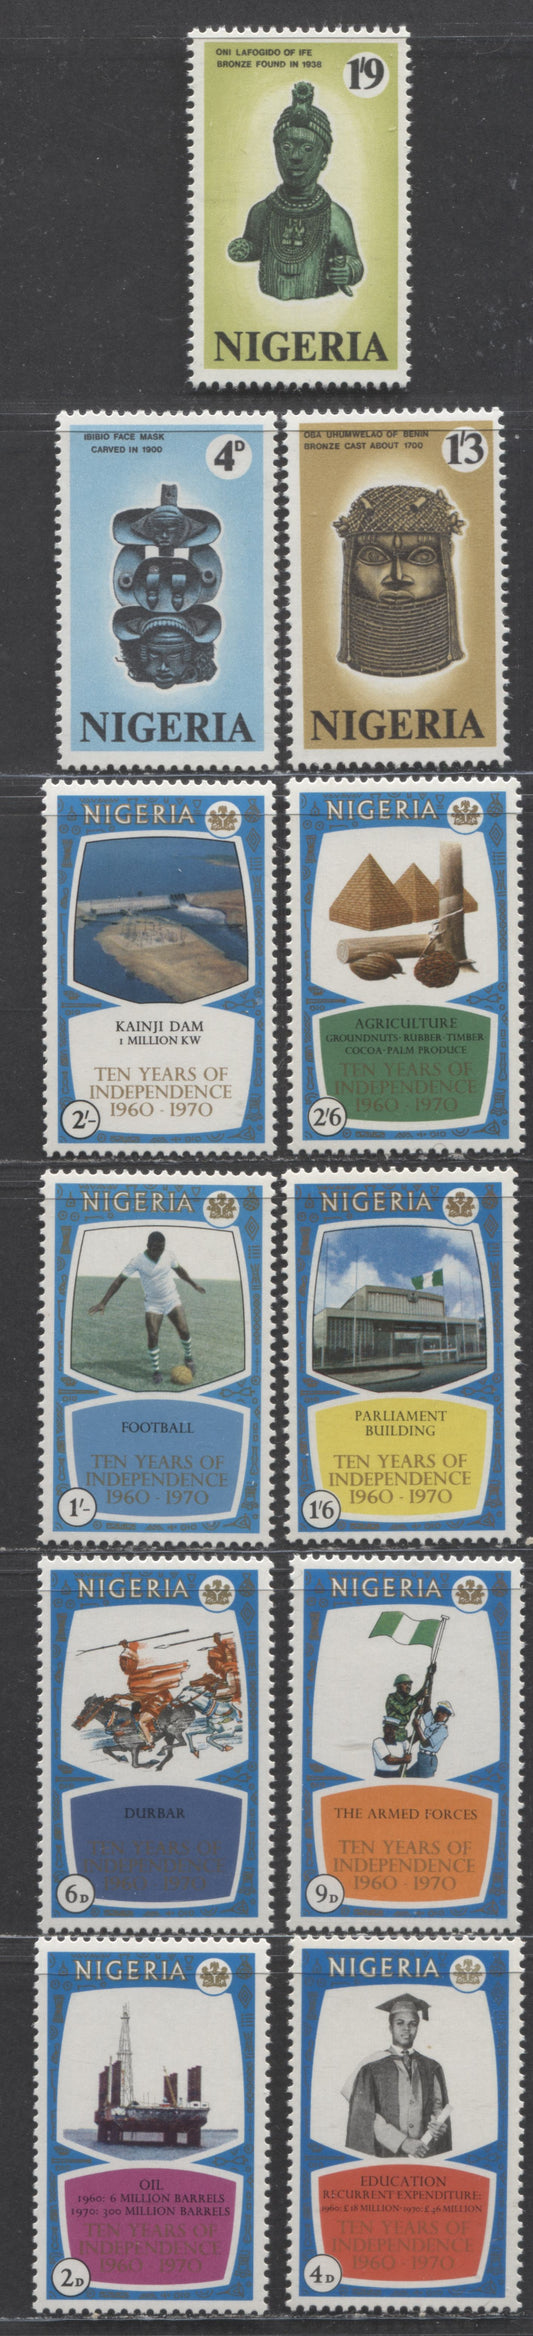 Nigeria SC#243/257 1970-1971 10th Anniversary Of Independence - Antiquities Issues, 11 VFNH Singles, Click on Listing to See ALL Pictures, 2022 Scott Classic Cat. $4.5 USD